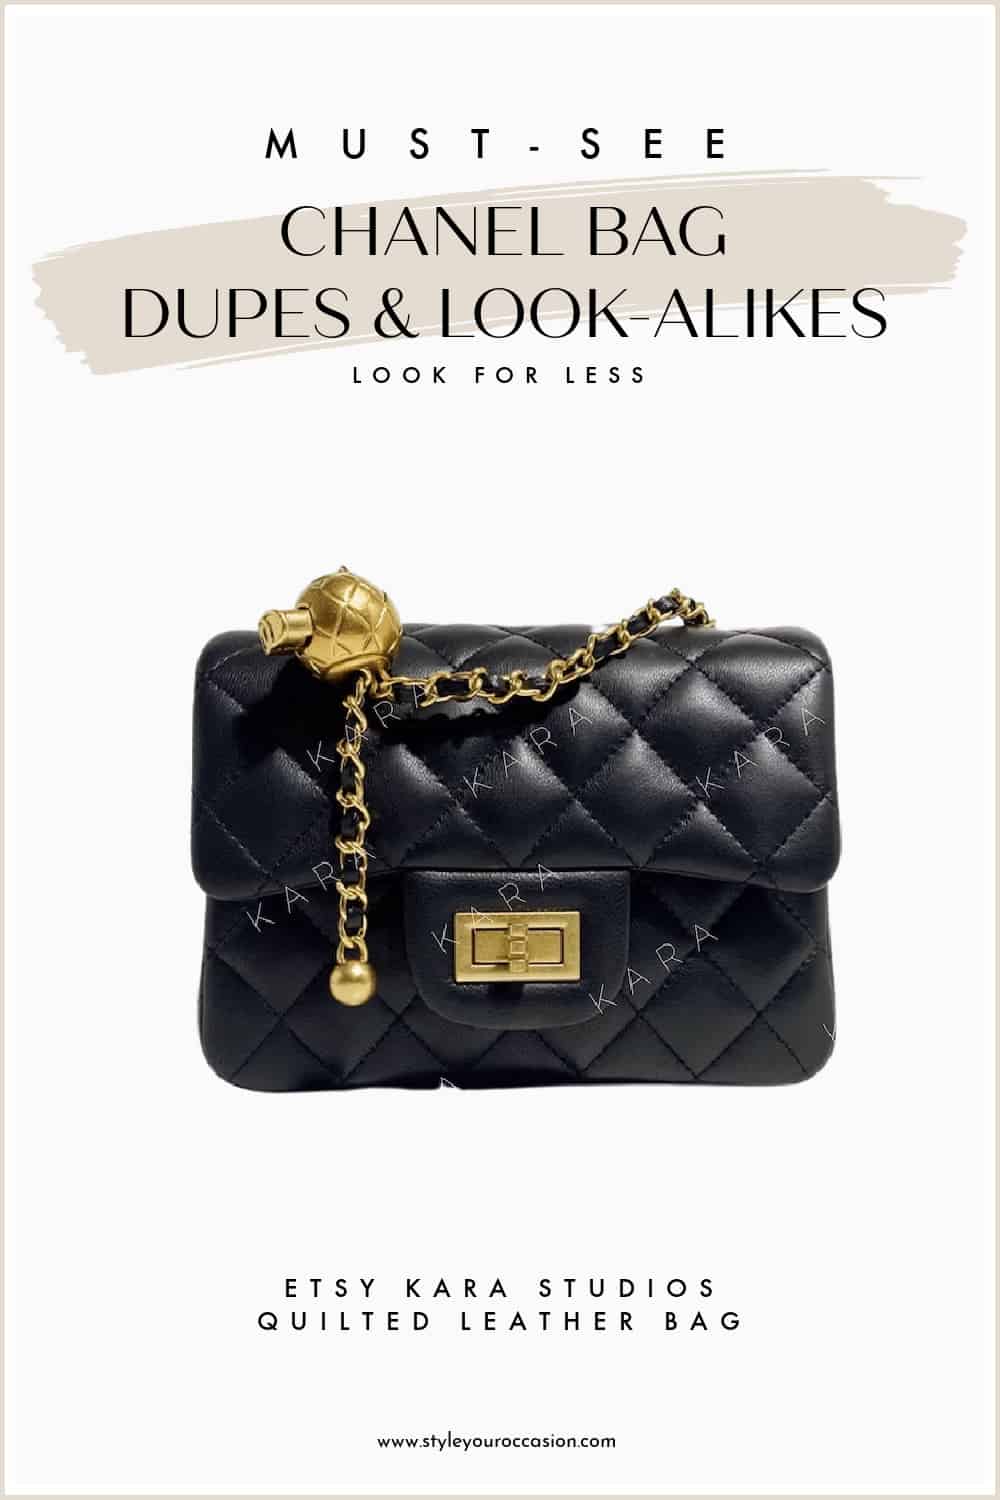 An image of a black quilted Chanel bag dupe from Etsy